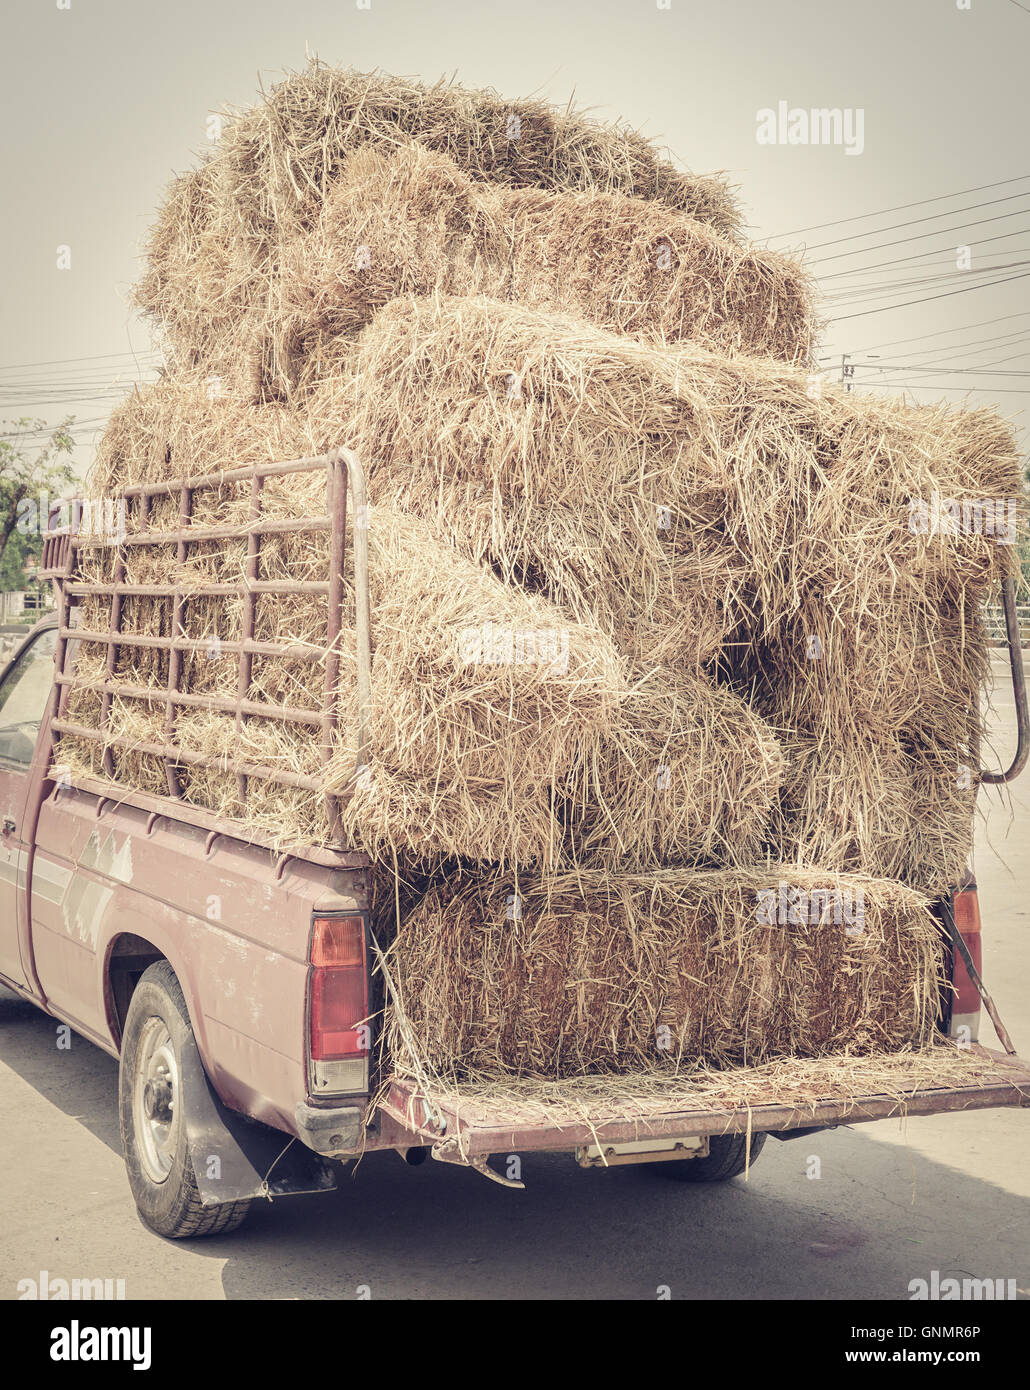 Dried yellow hay or haystack on old truck, colored filter effect Stock Photo